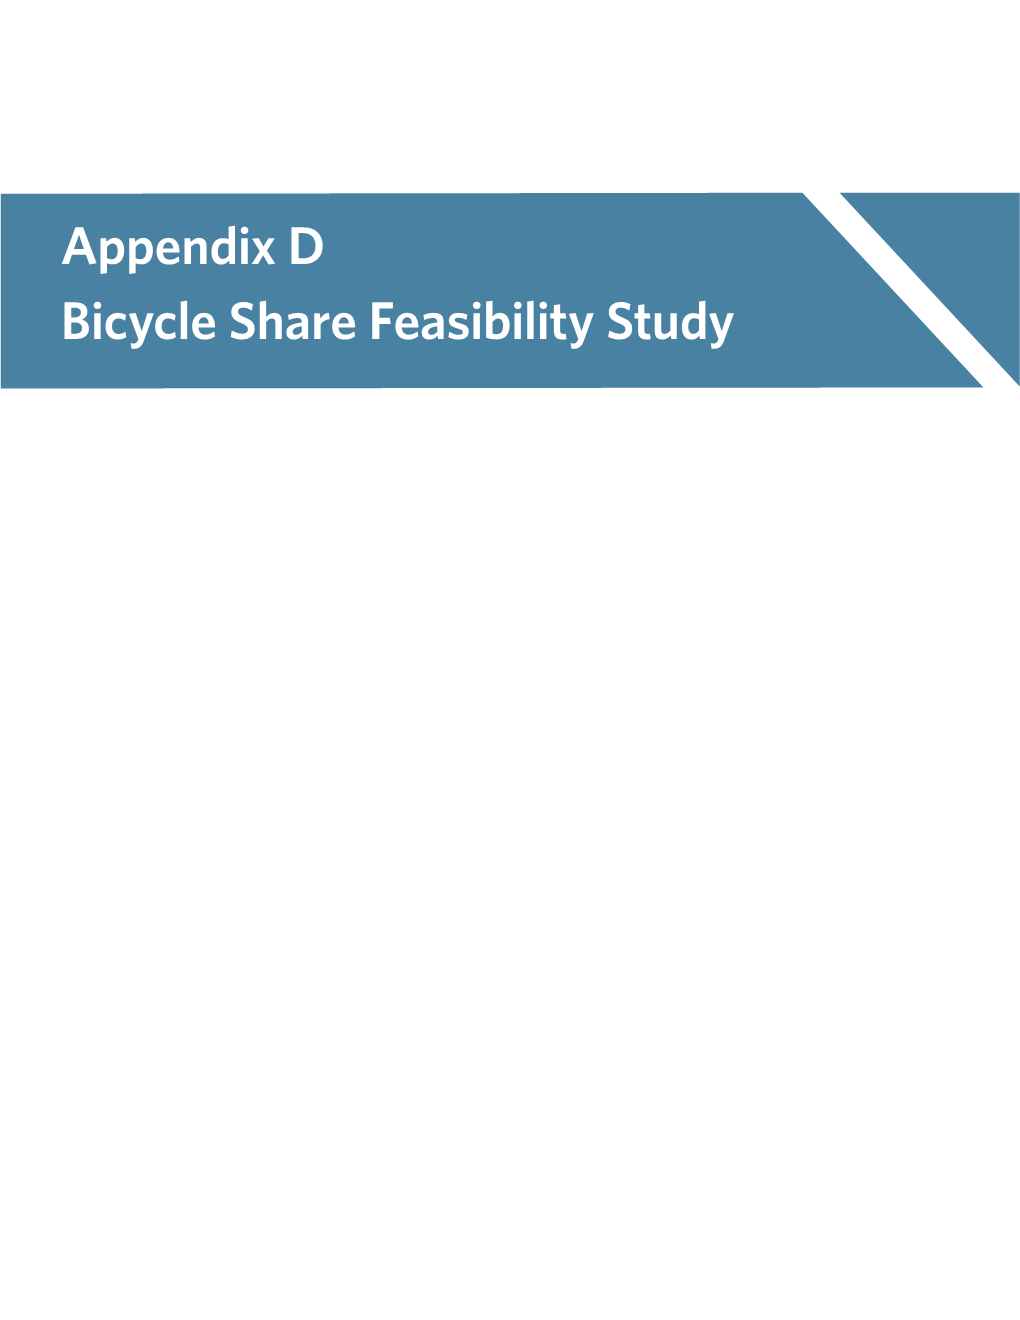 Appendix D Bicycle Share Feasibility Study